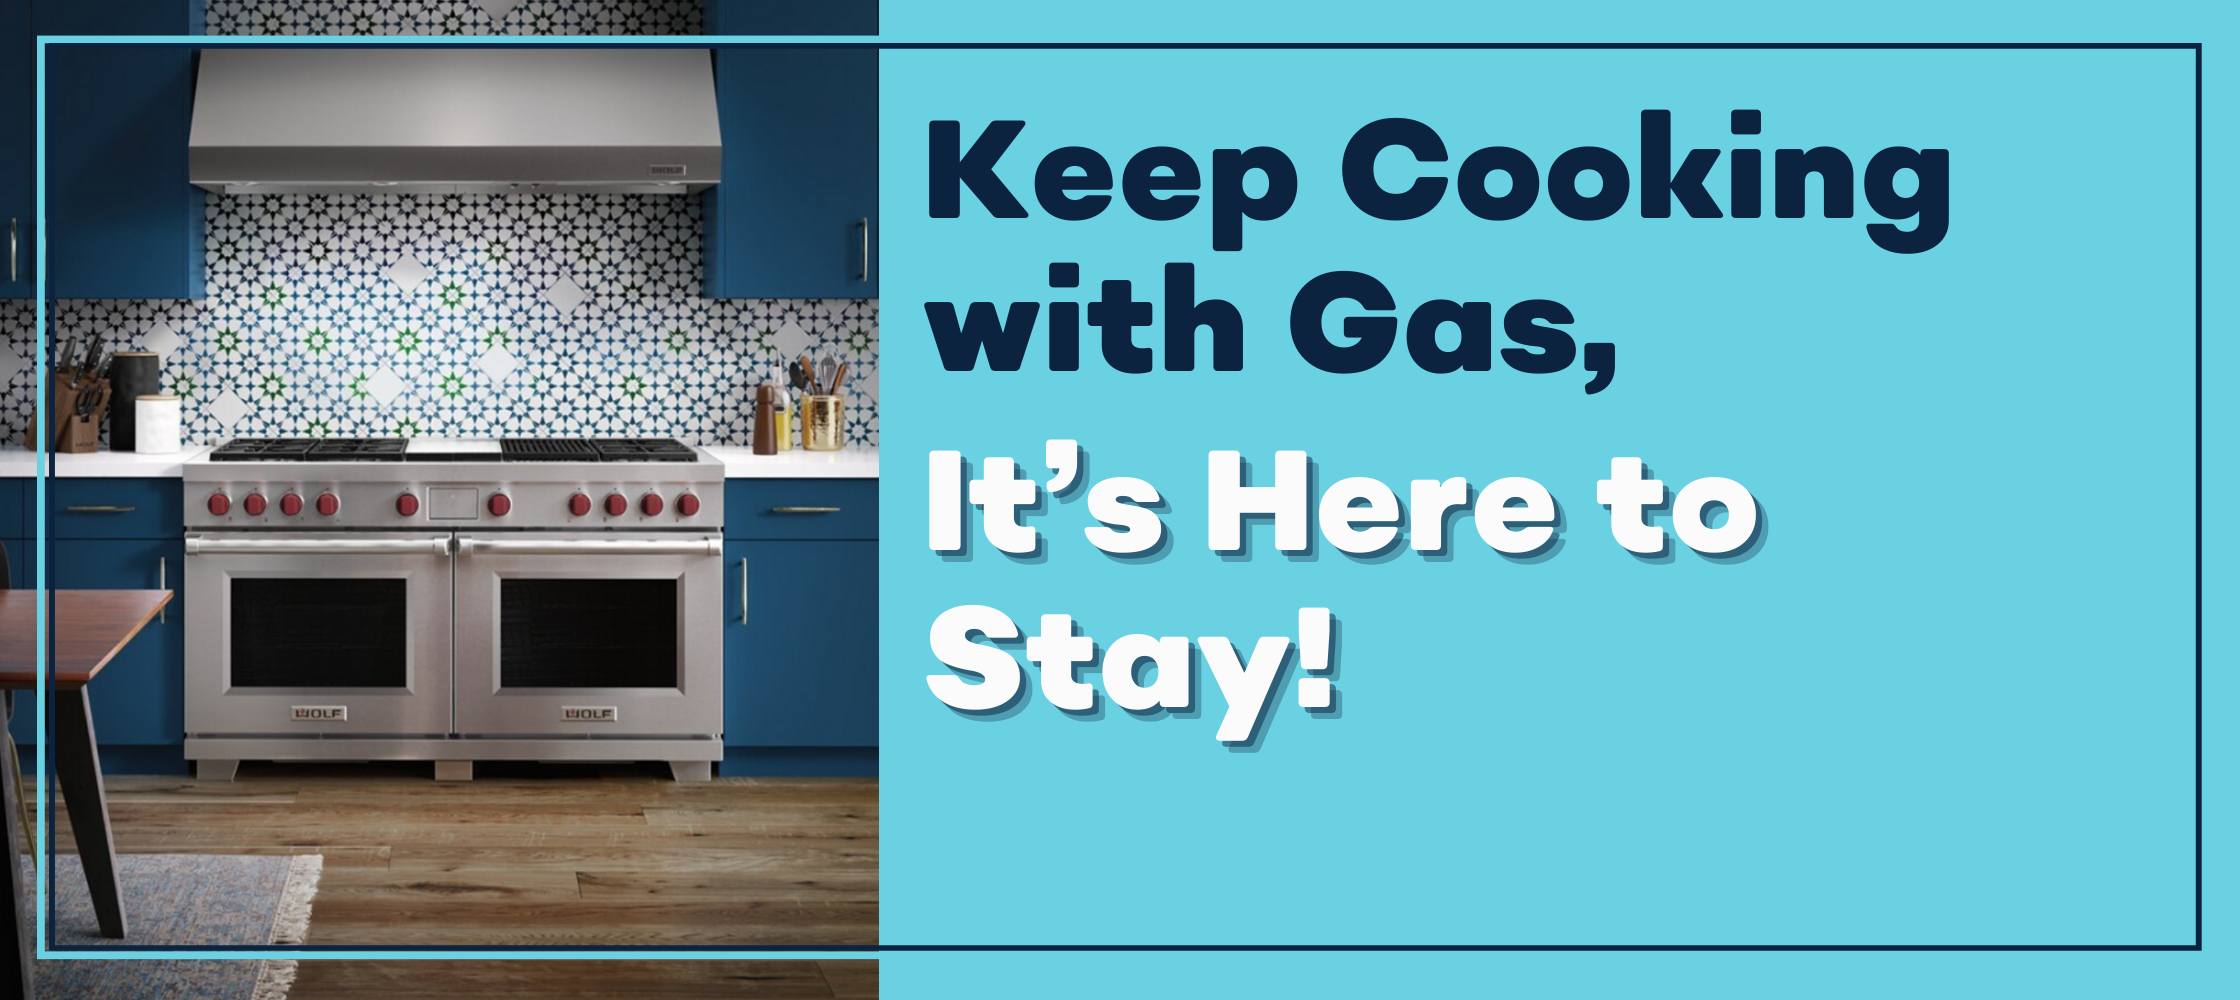 Keep Cooking with Gas, It's here to stay!